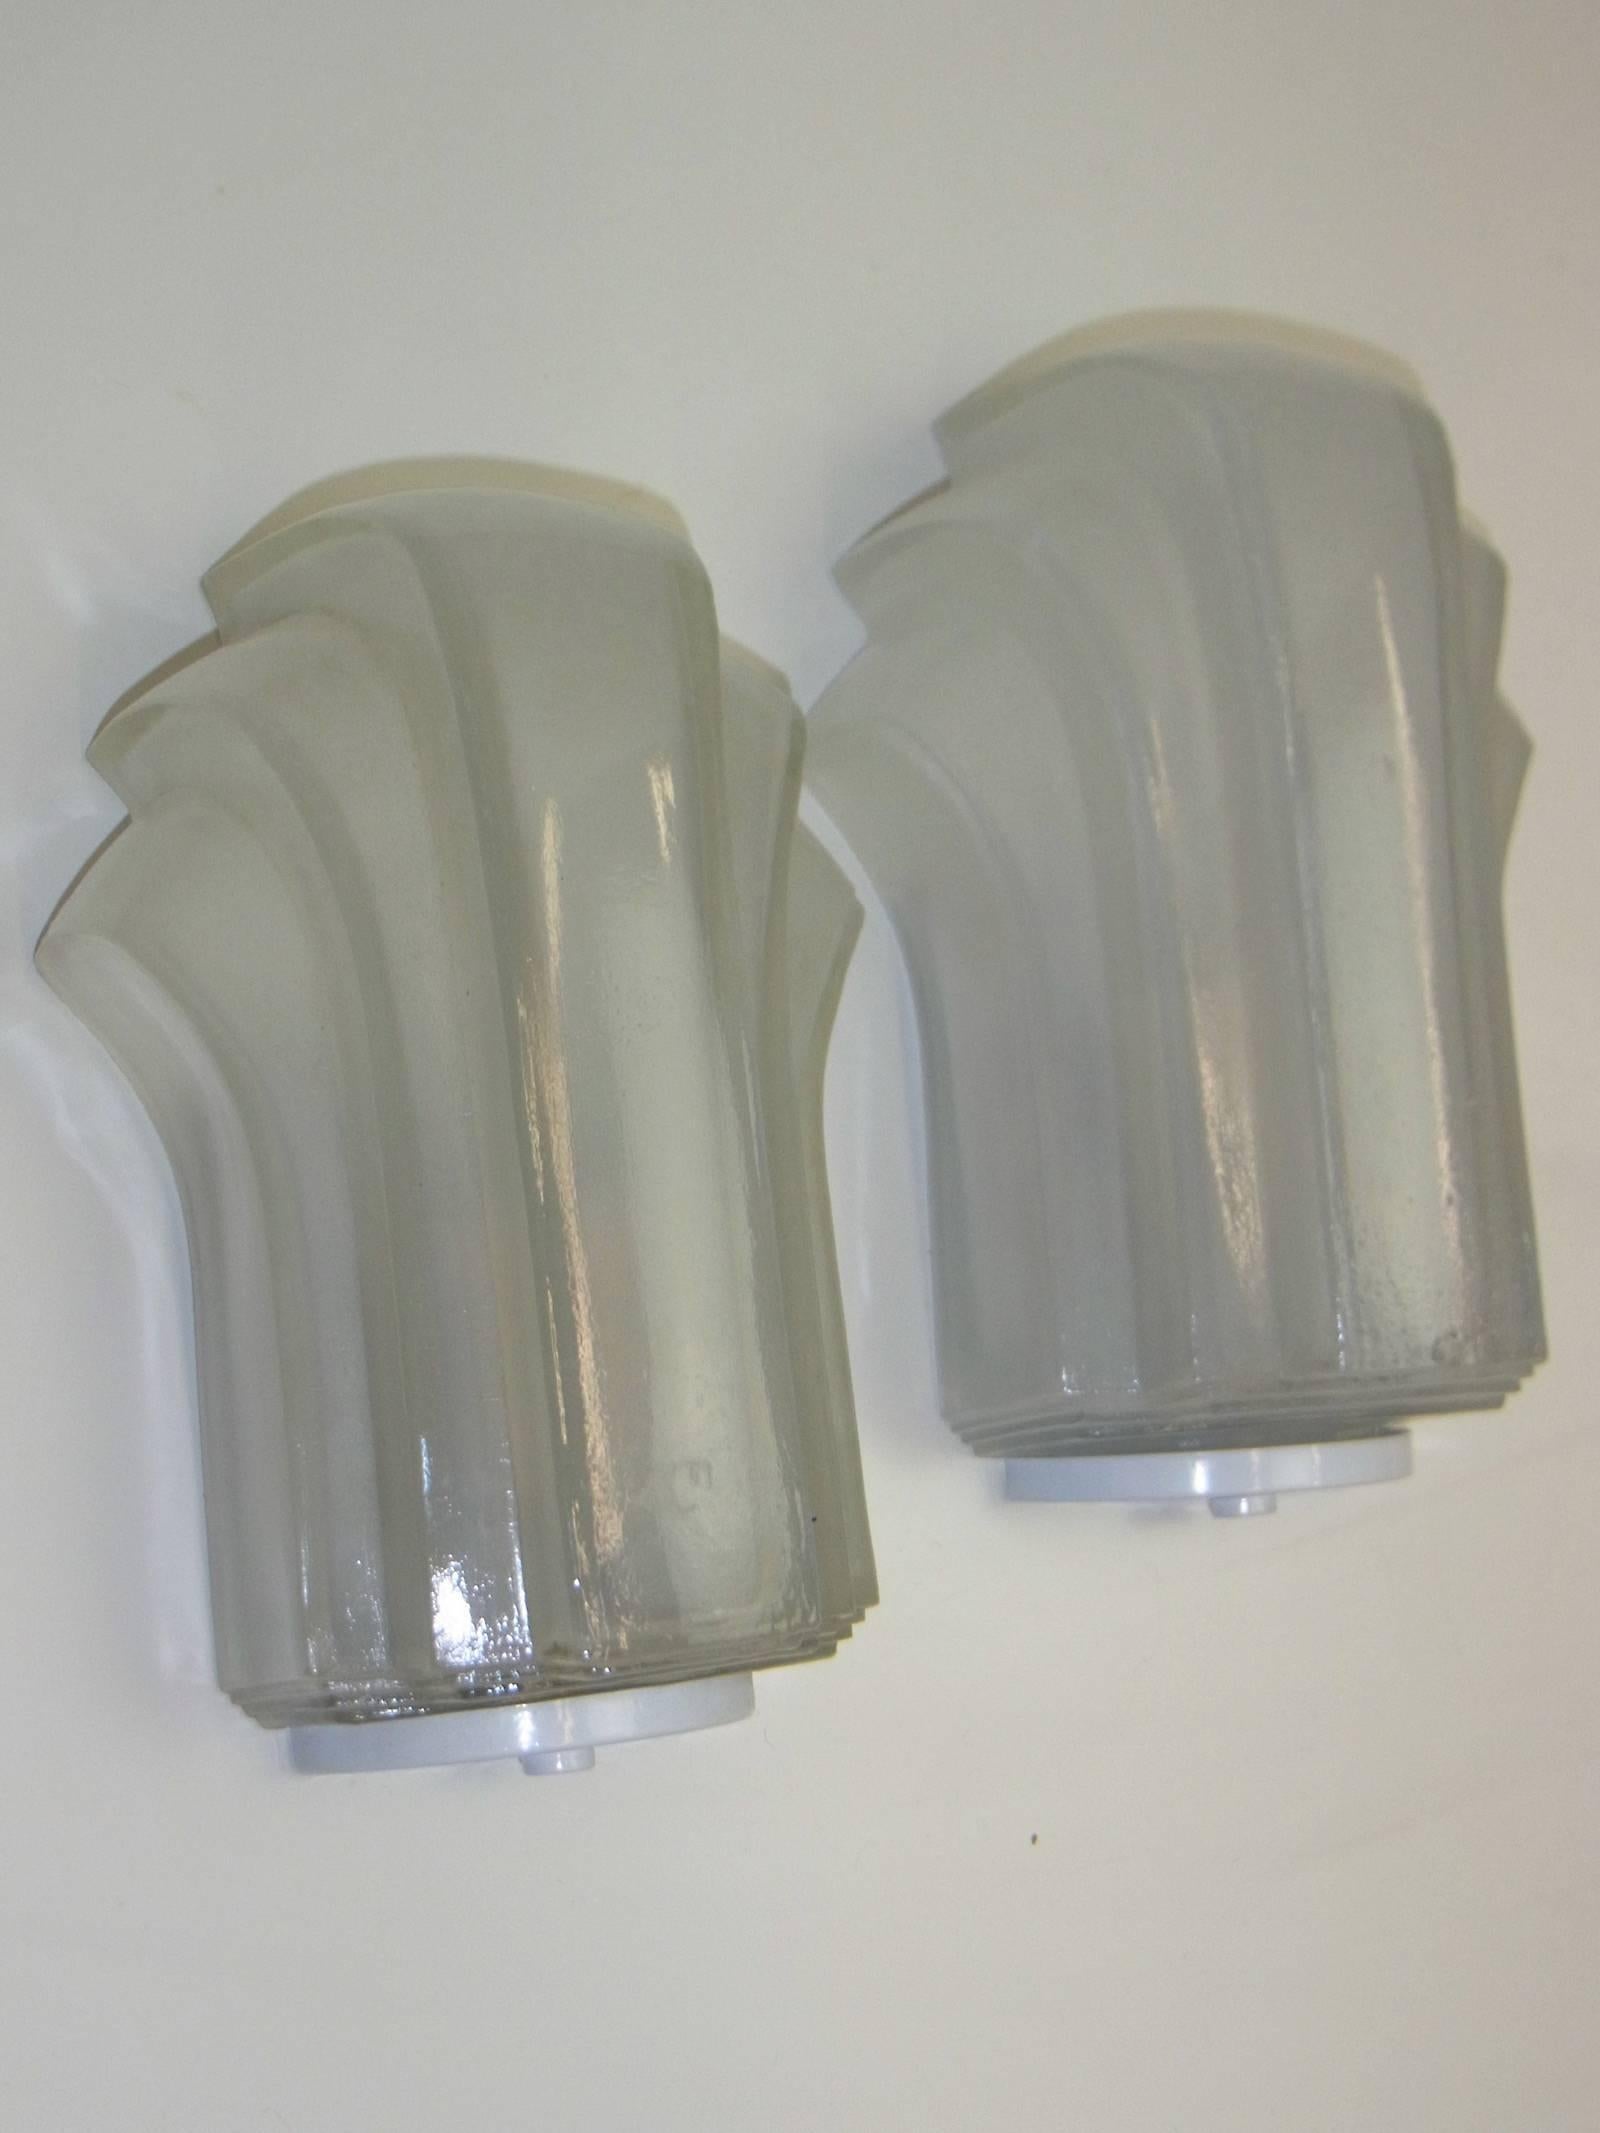 One pair of Art Deco style sconces. These Art Deco style wall sconces feature an enamel white mounting with a multi-tiered, Skyscraper style design. The frosted relief glass shades rest atop the frames for a seamless design. Each fixture requires